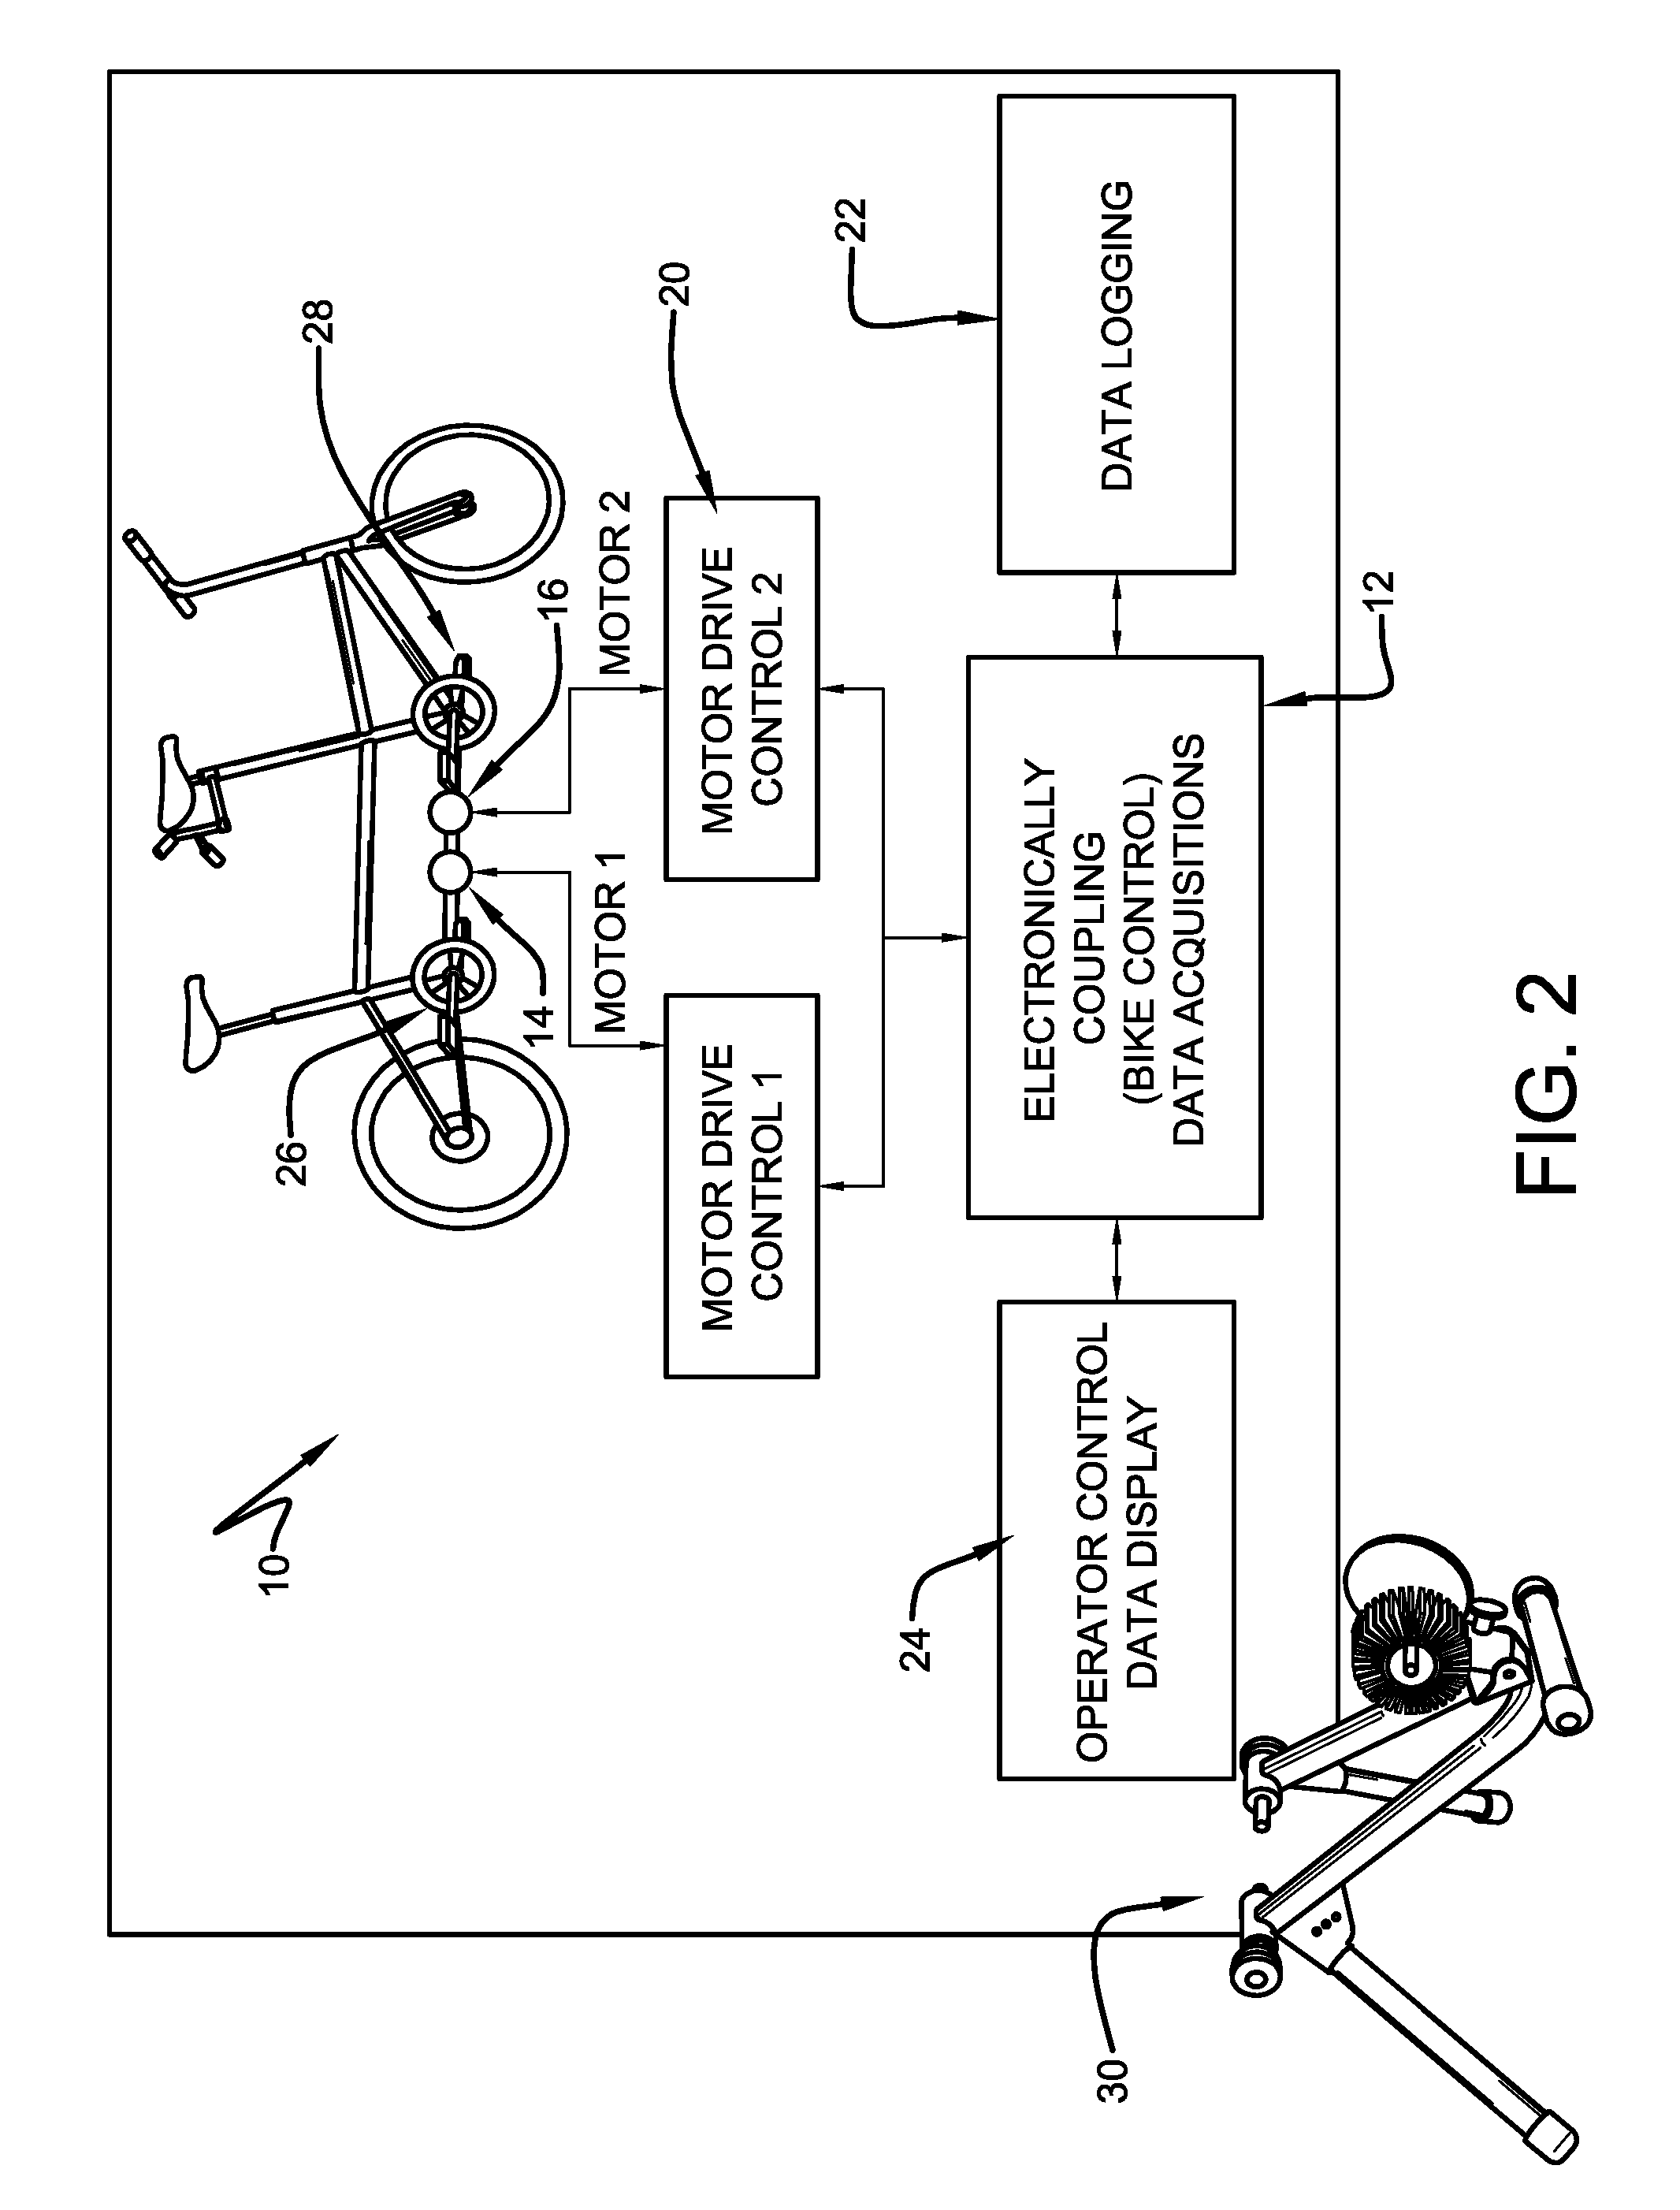 Bike System For Use In Rehabilitation Of A Patient